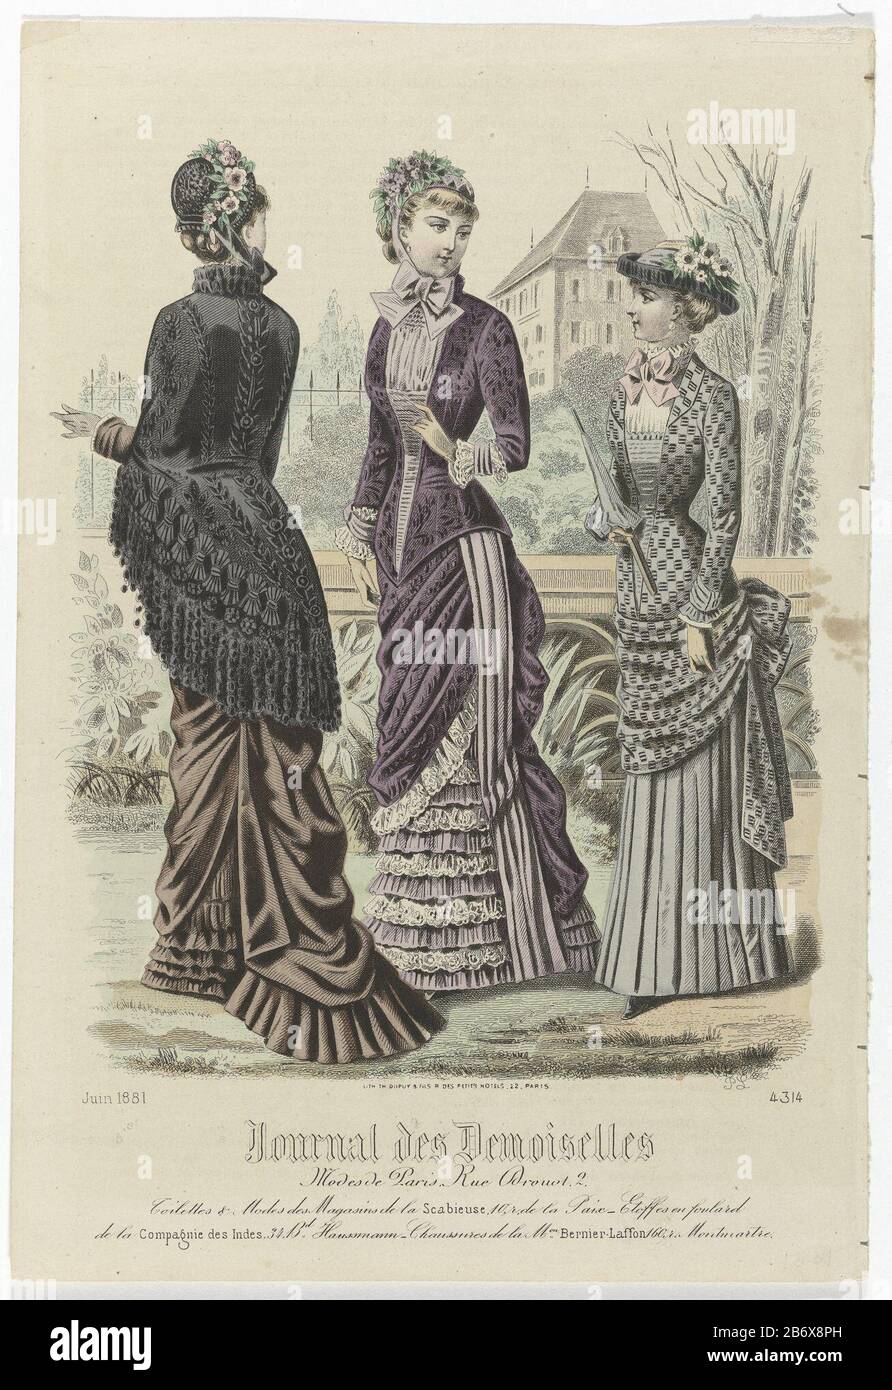 Journal des Demoiselles, juin 1881, No 4314 Toilettes & Modes Three women,  of whom: one seen from behind, in a garden. In the background a farm.  According to the caption, the dresses